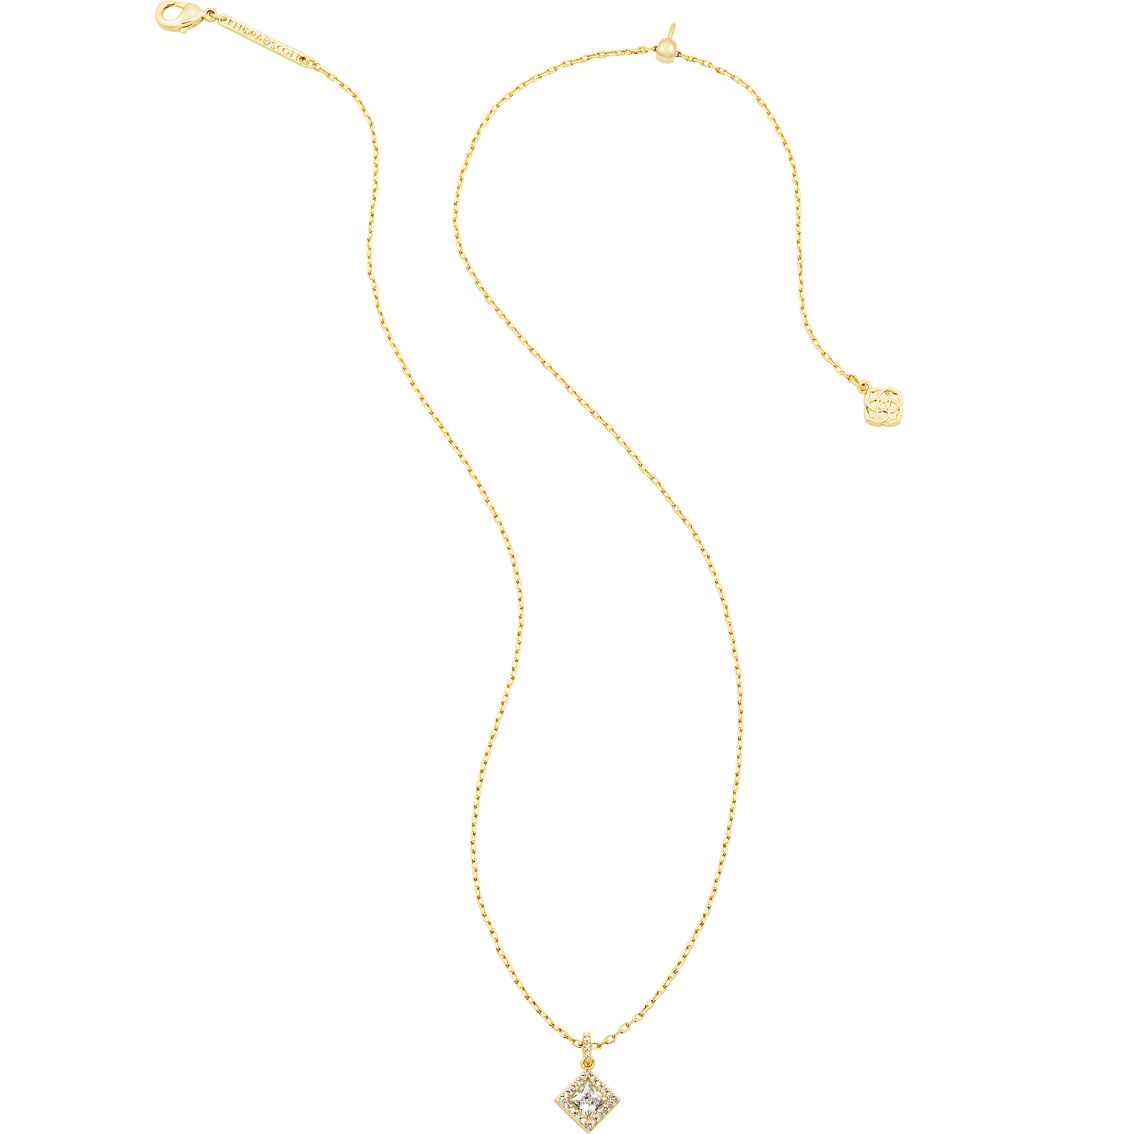 Kendra Scott Gracie Pendant Necklace in Gold White Cubic Zirconia - Image 2 of 2